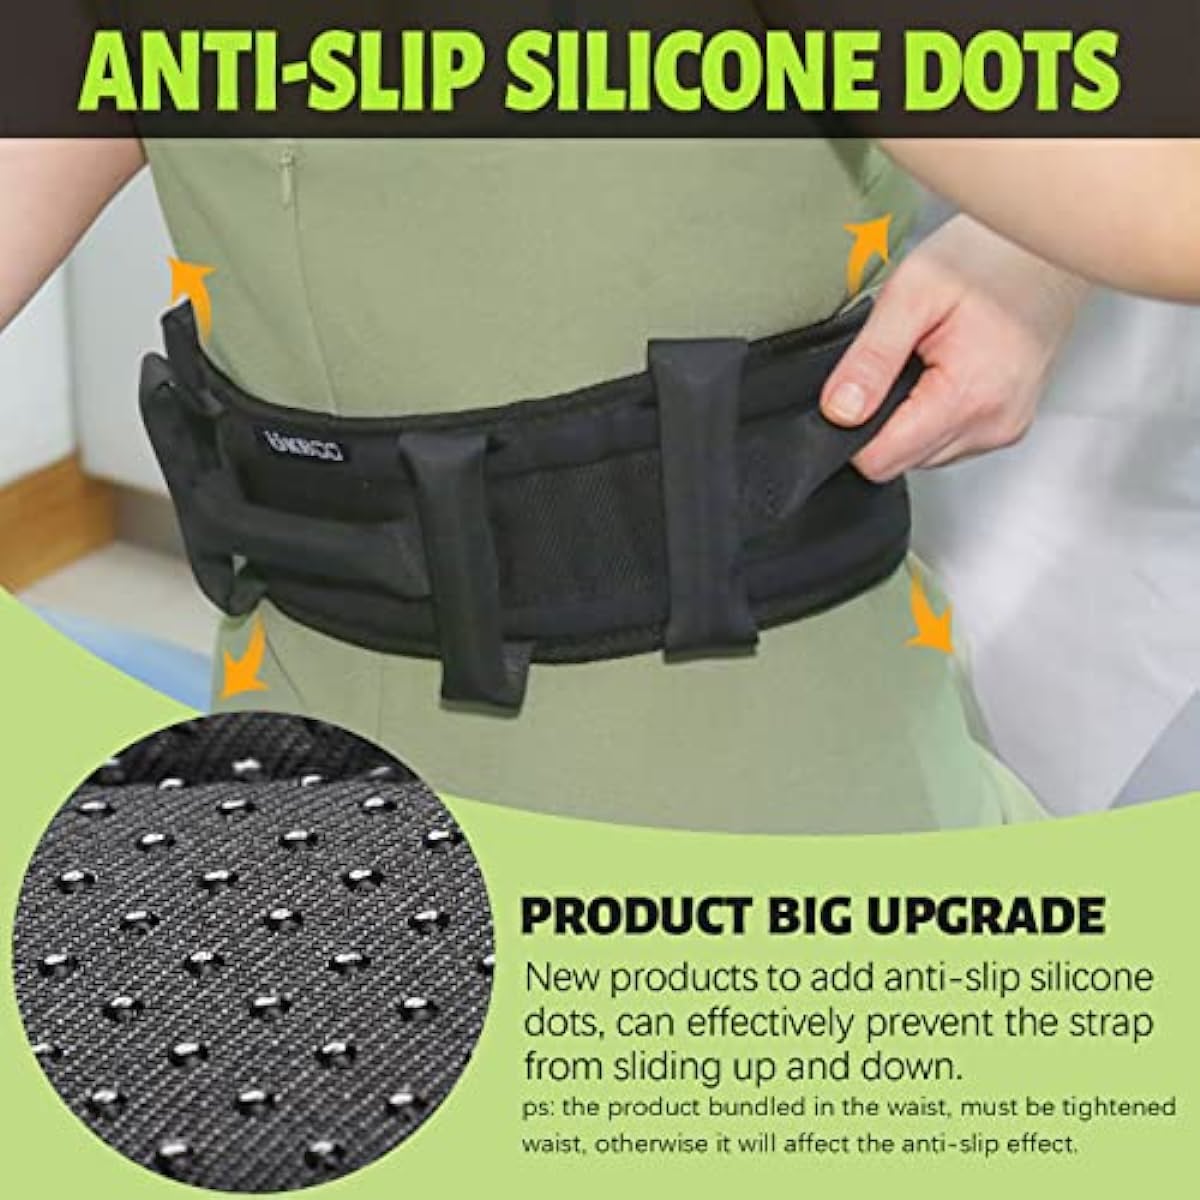 Upgraded UKBOO Gait Belt with 7 Padded Handles, Adjustable Size 29\" to 54\", Metal Buckles for The Elderly, Disabled, Bariatric, Medical Supplies Transfer Belt, Elderly Assistance Products